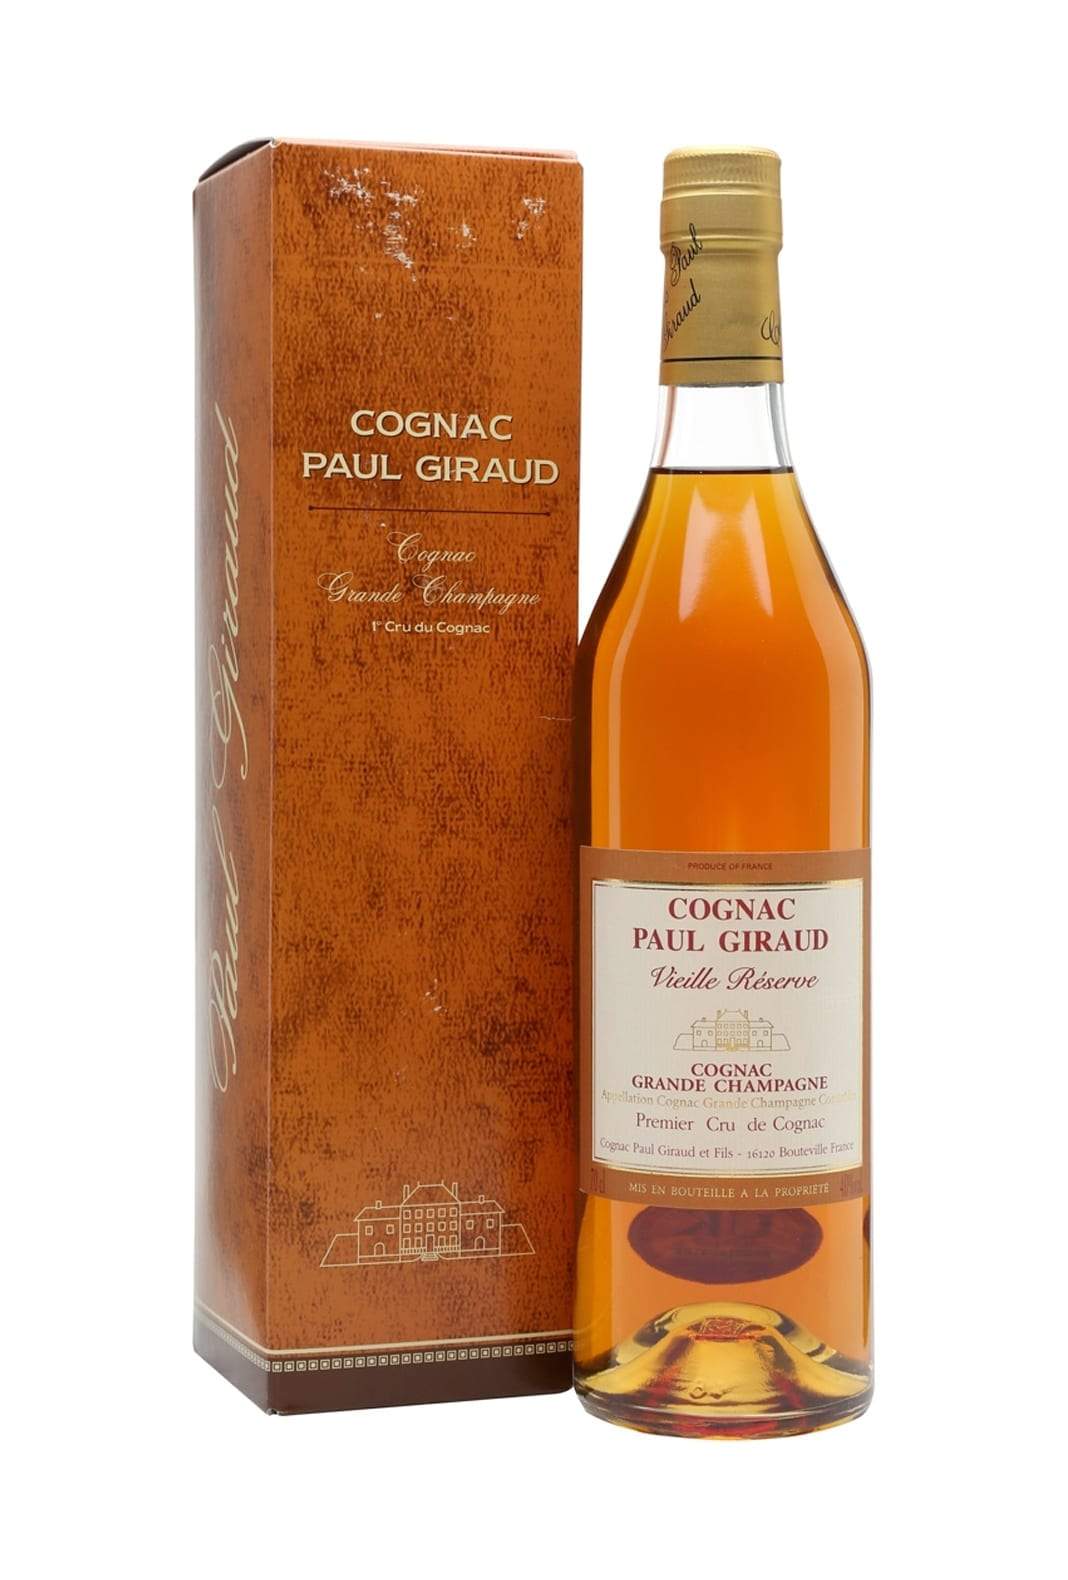 Paul Giraud Cognac Vieille Reserve 25 years Grande Champagne 40% 700ml | Brandy | Shop online at Spirits of France